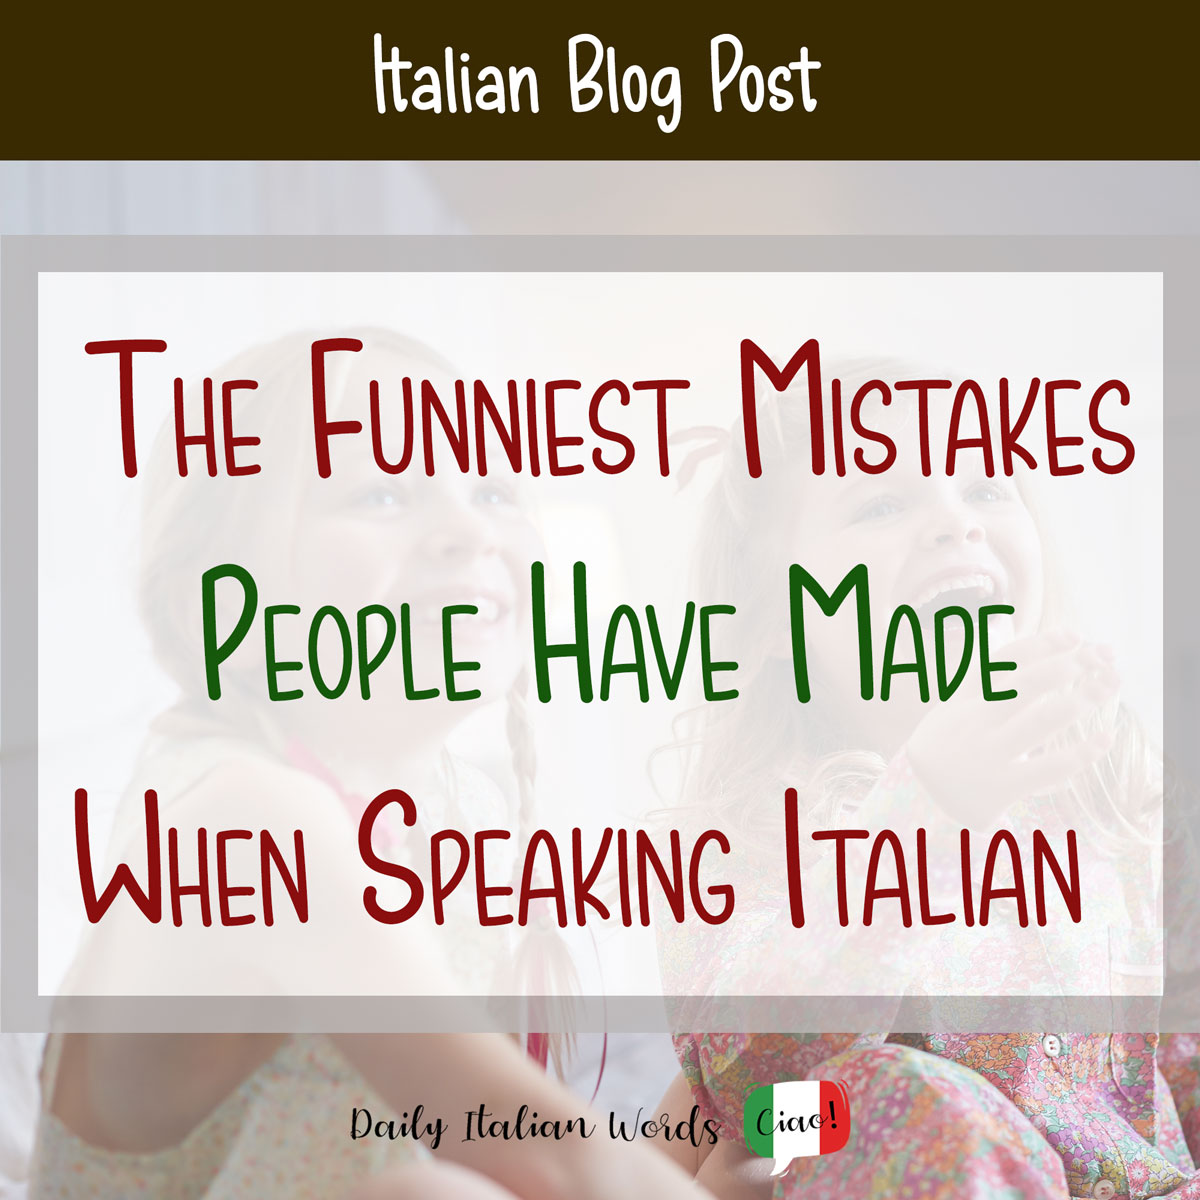 The funniest mistakes people make when speaking Italian